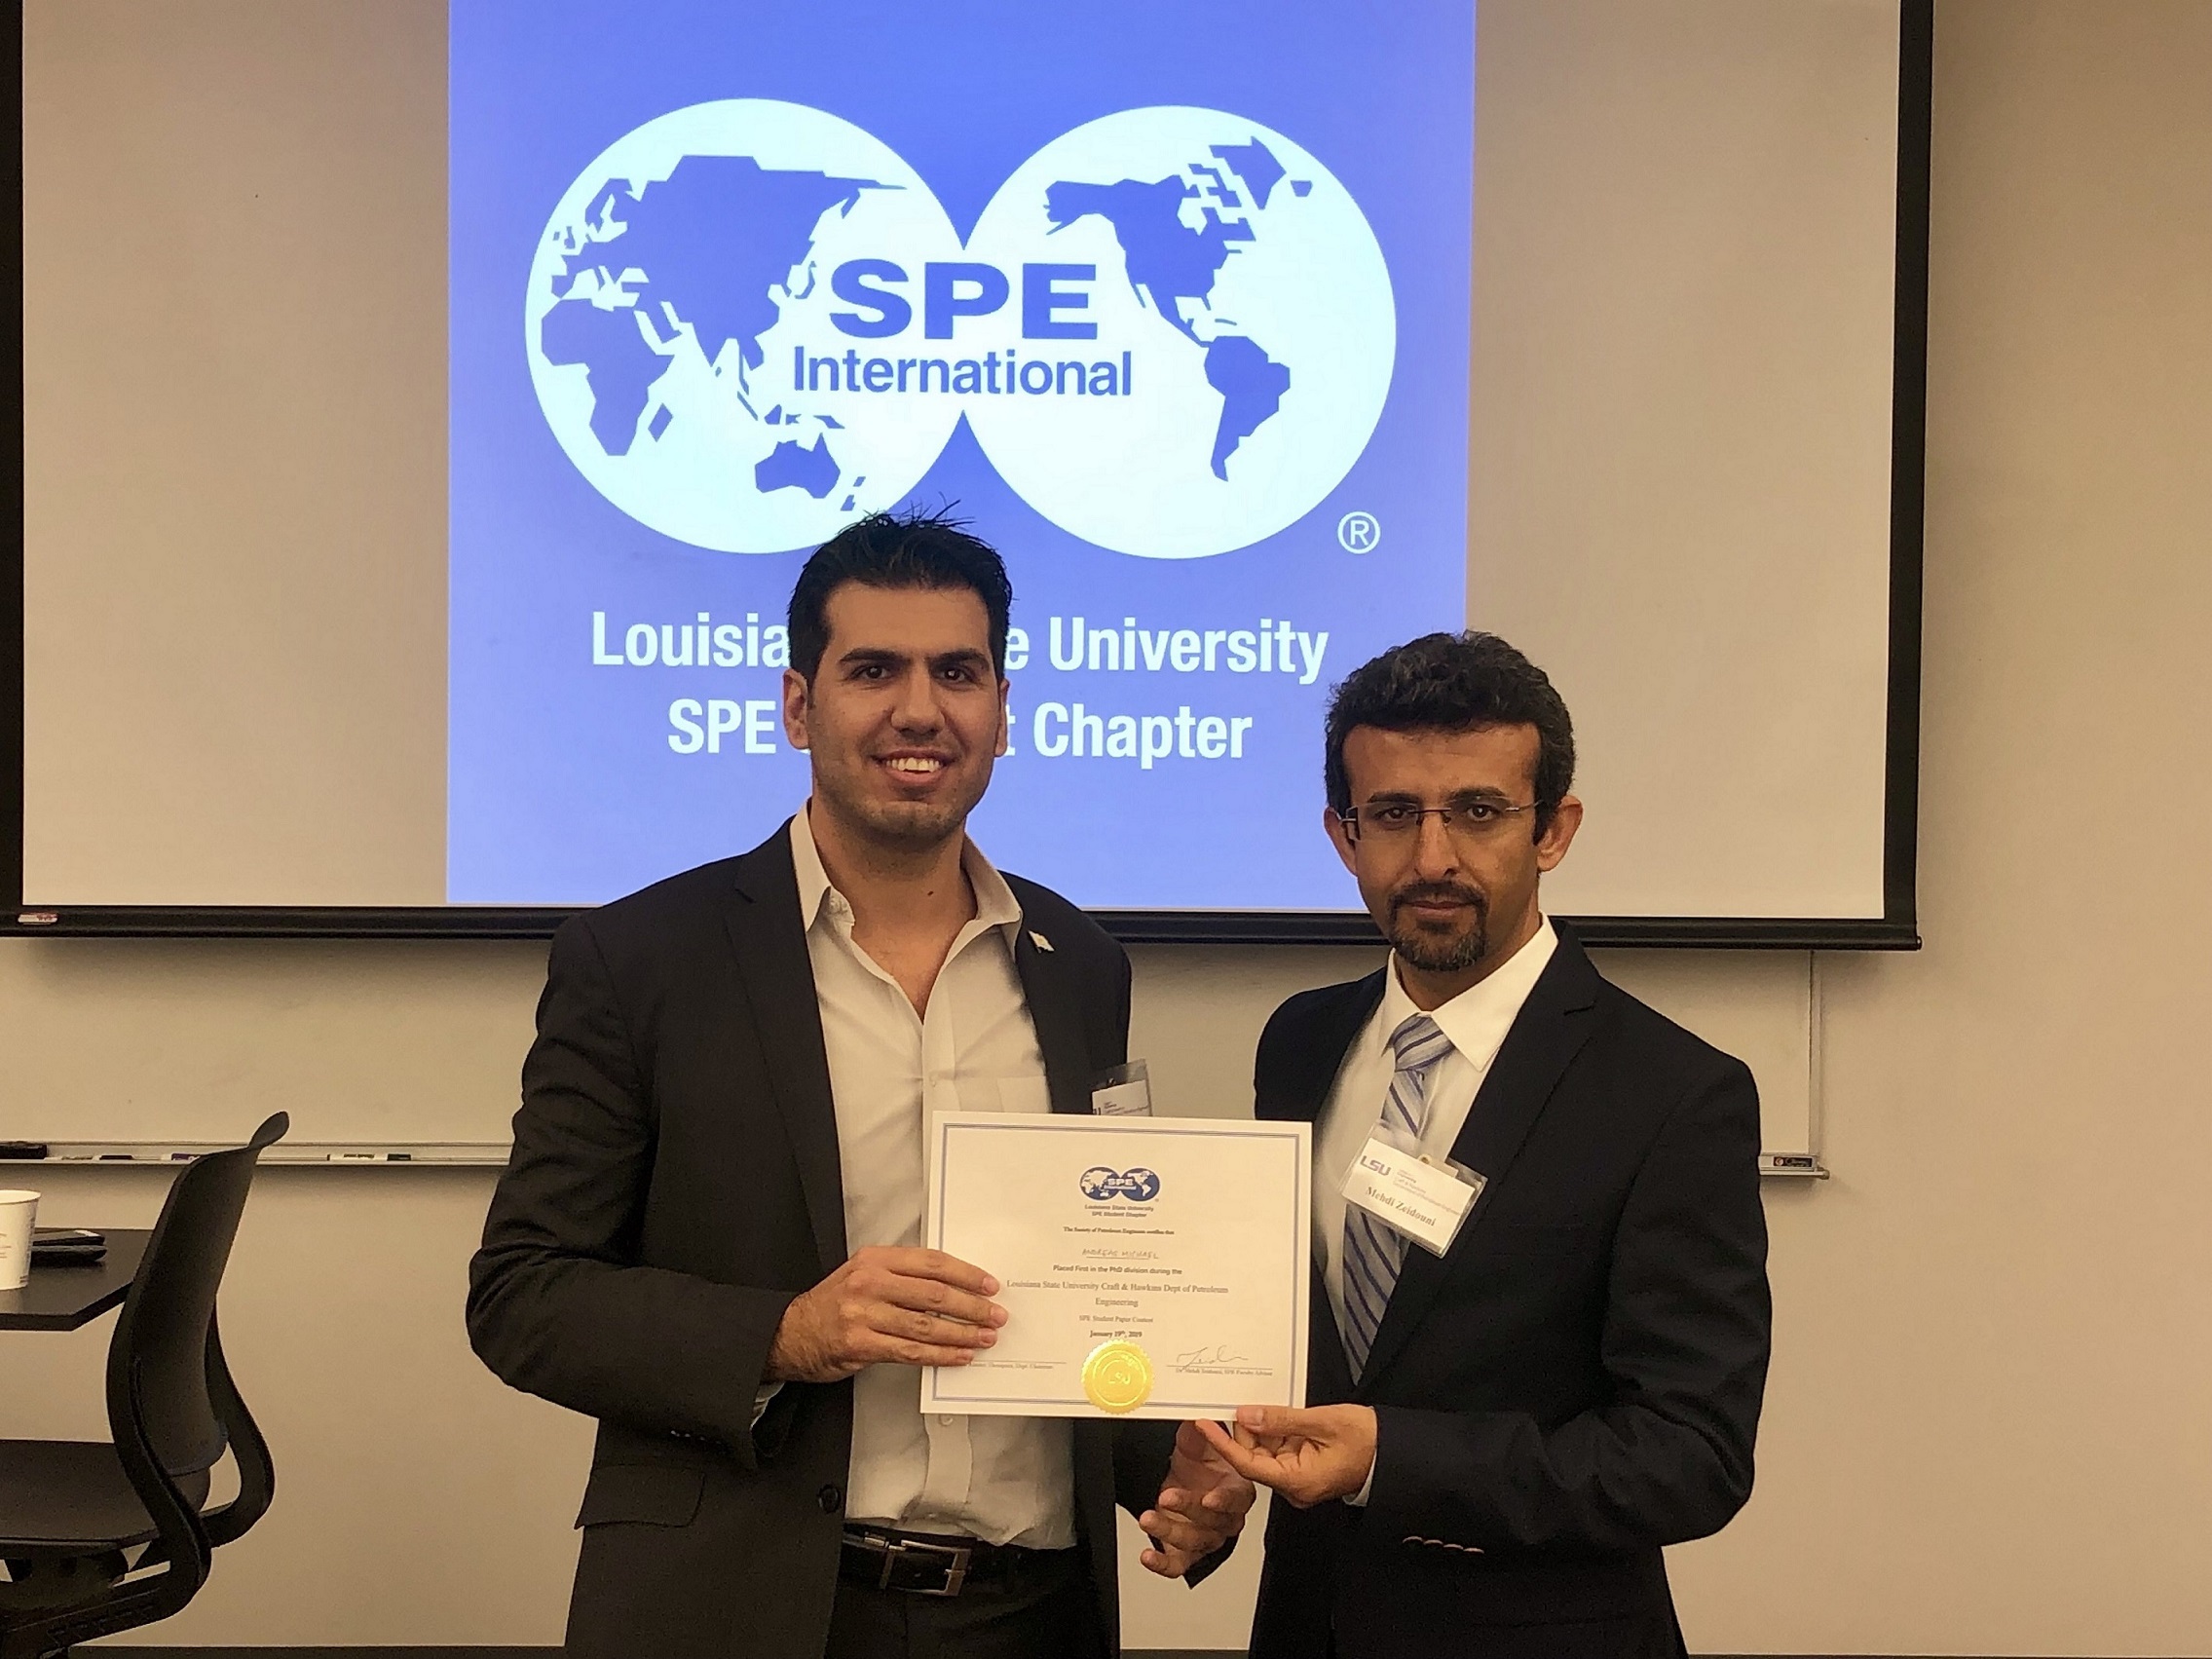 Andreas Michael pictured with Faculty advisor Dr. Mehdi Zeidouni